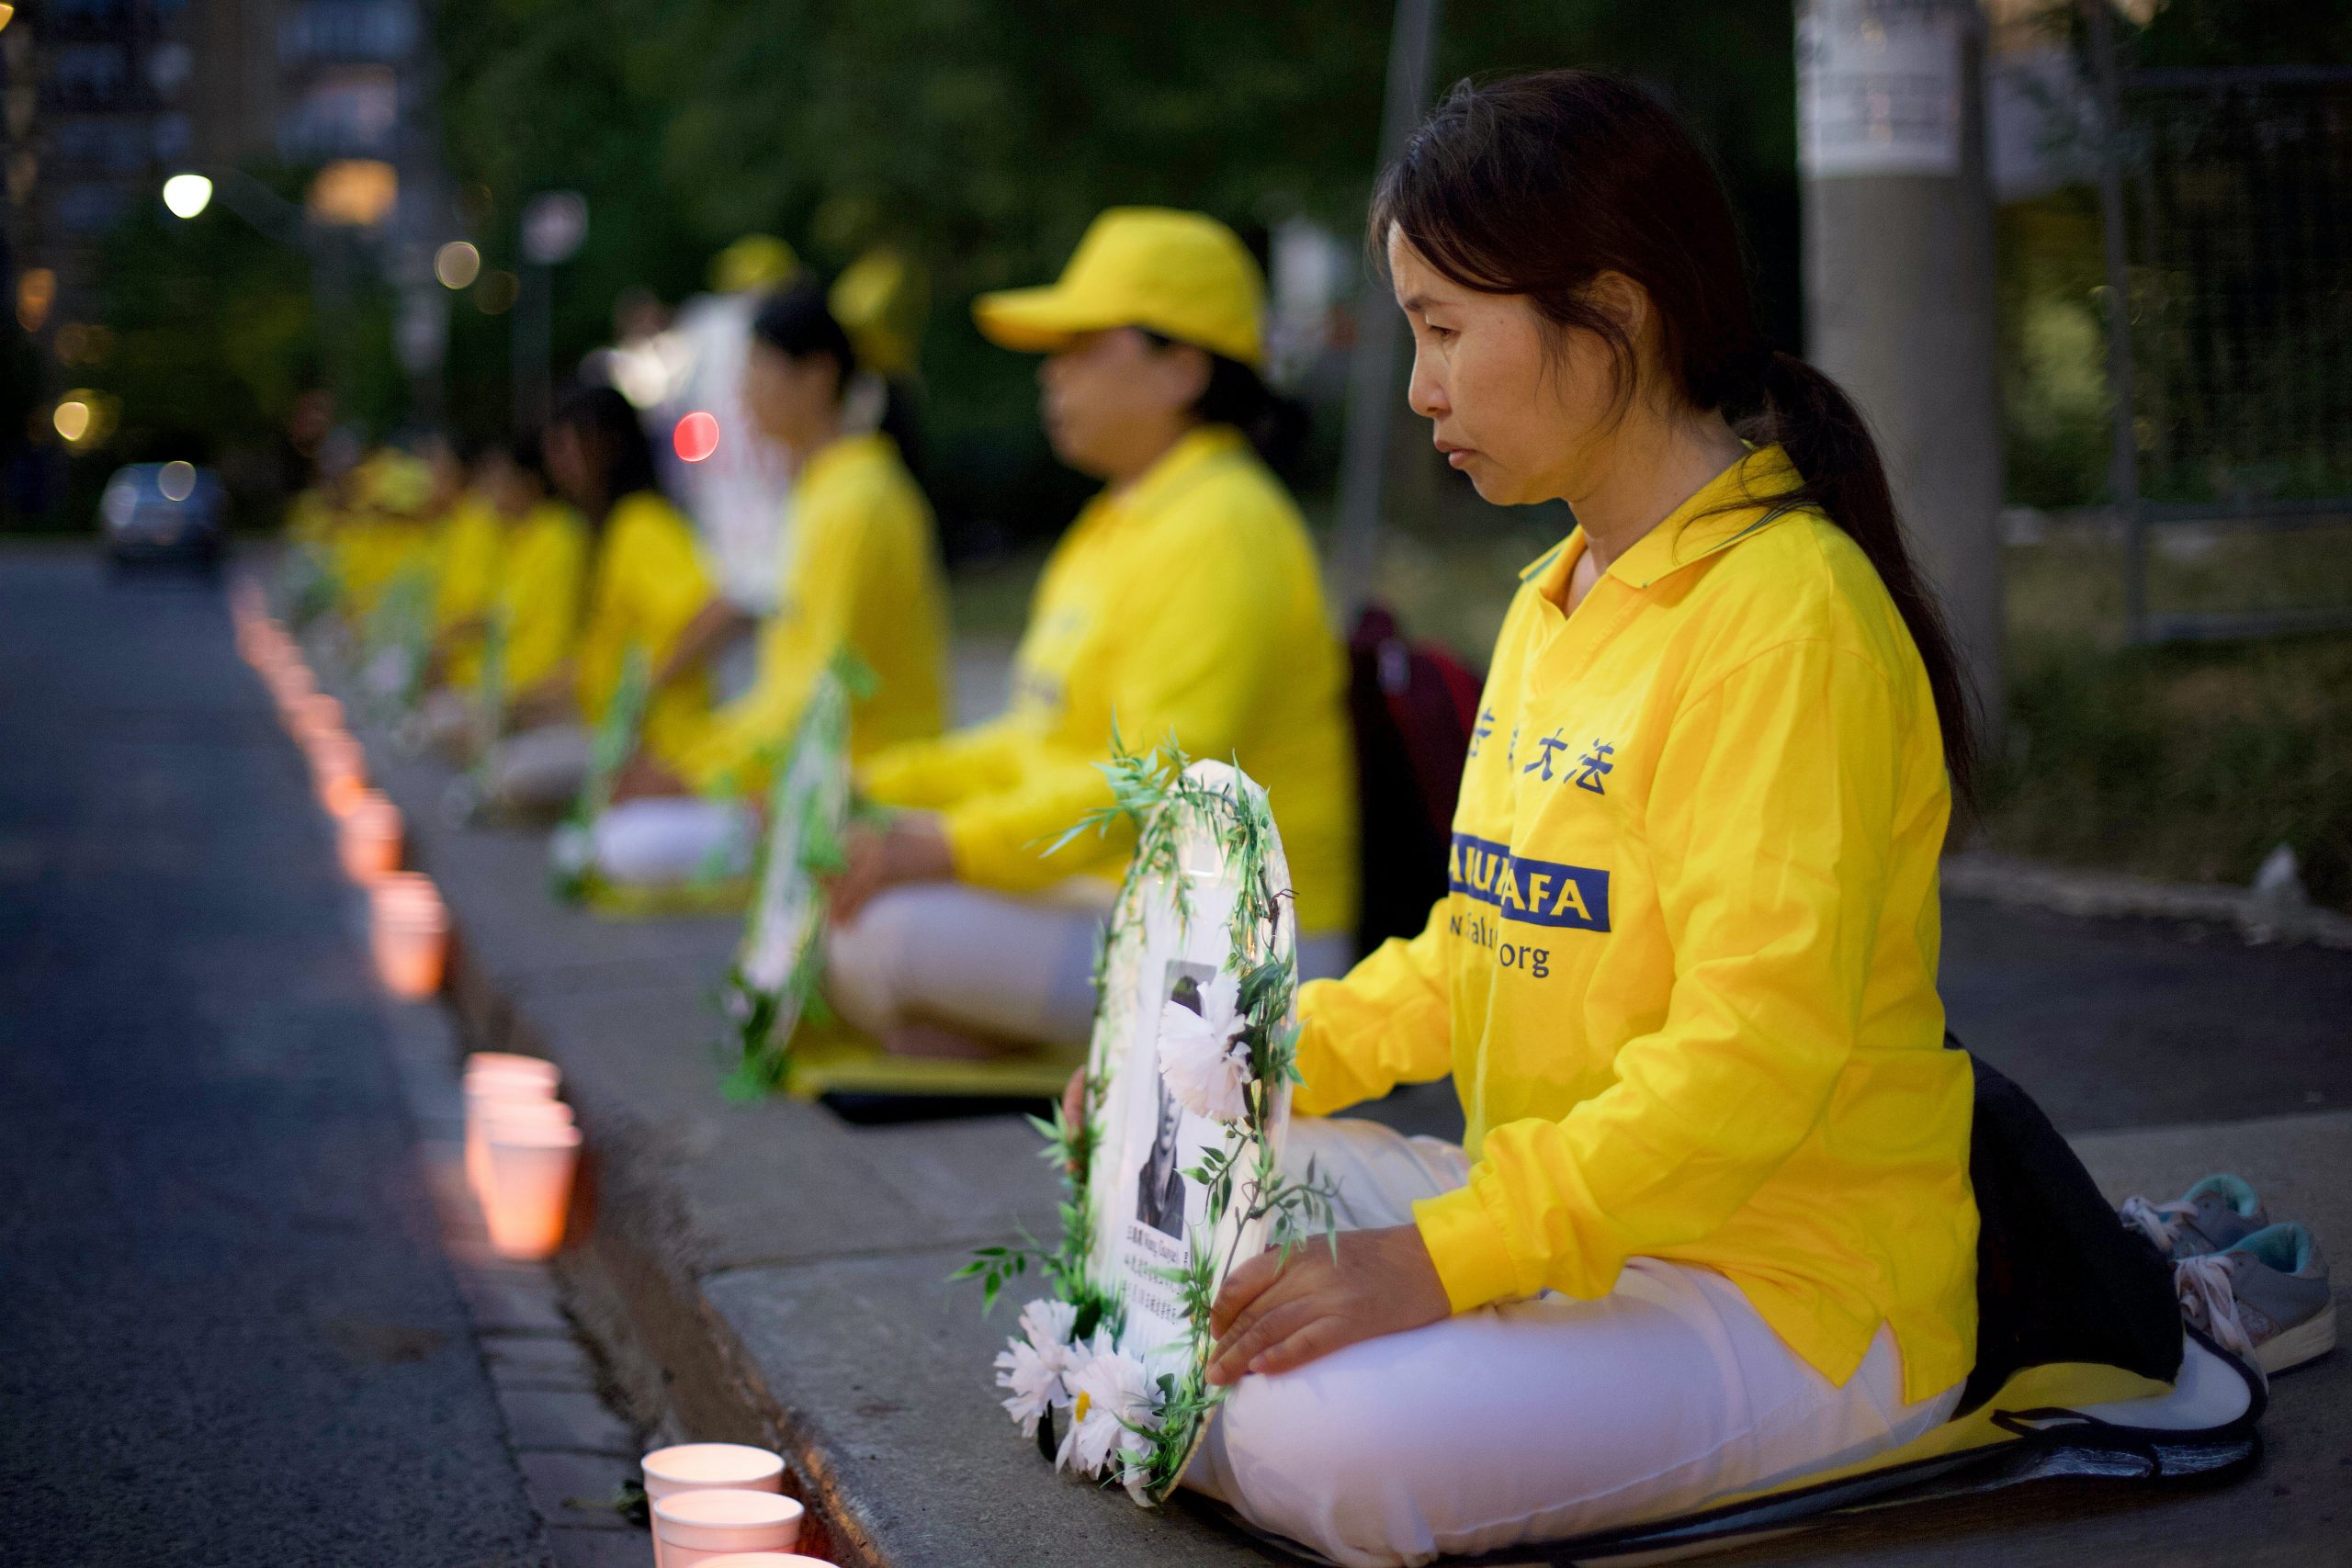 Killed for Profit: The Unheard Voices of Falun Gong Adherents